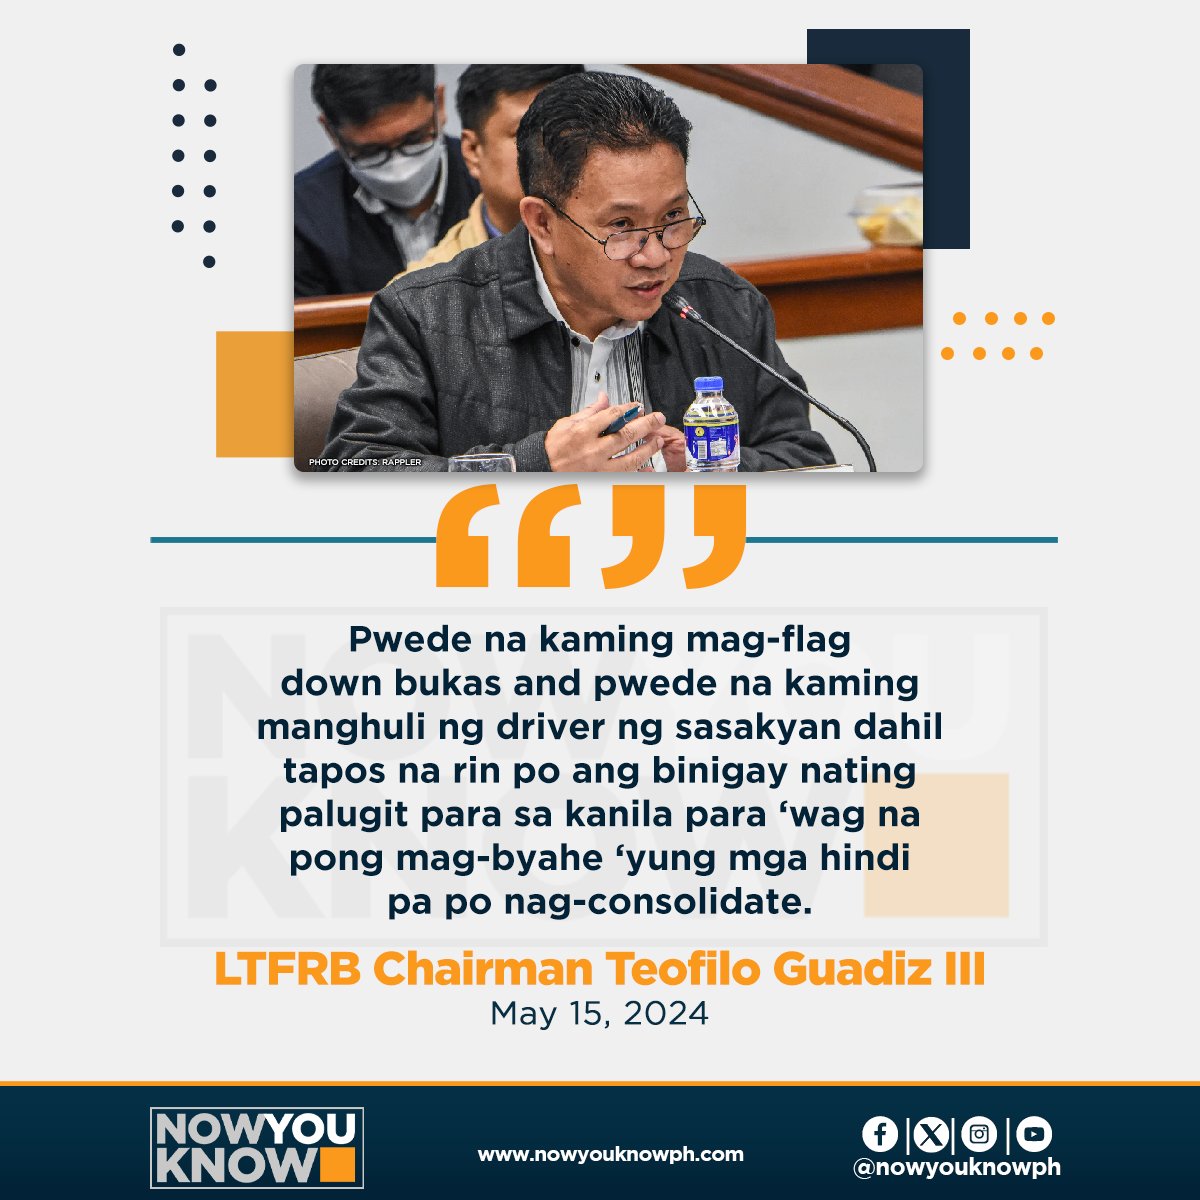 The Land Transportation Franchising and Regulatory Board (LTFRB) said Wednesday that starting Thursday, May 16, it will begin apprehending jeepney drivers who failed to consolidate their public utility vehicles (PUV) into cooperatives.